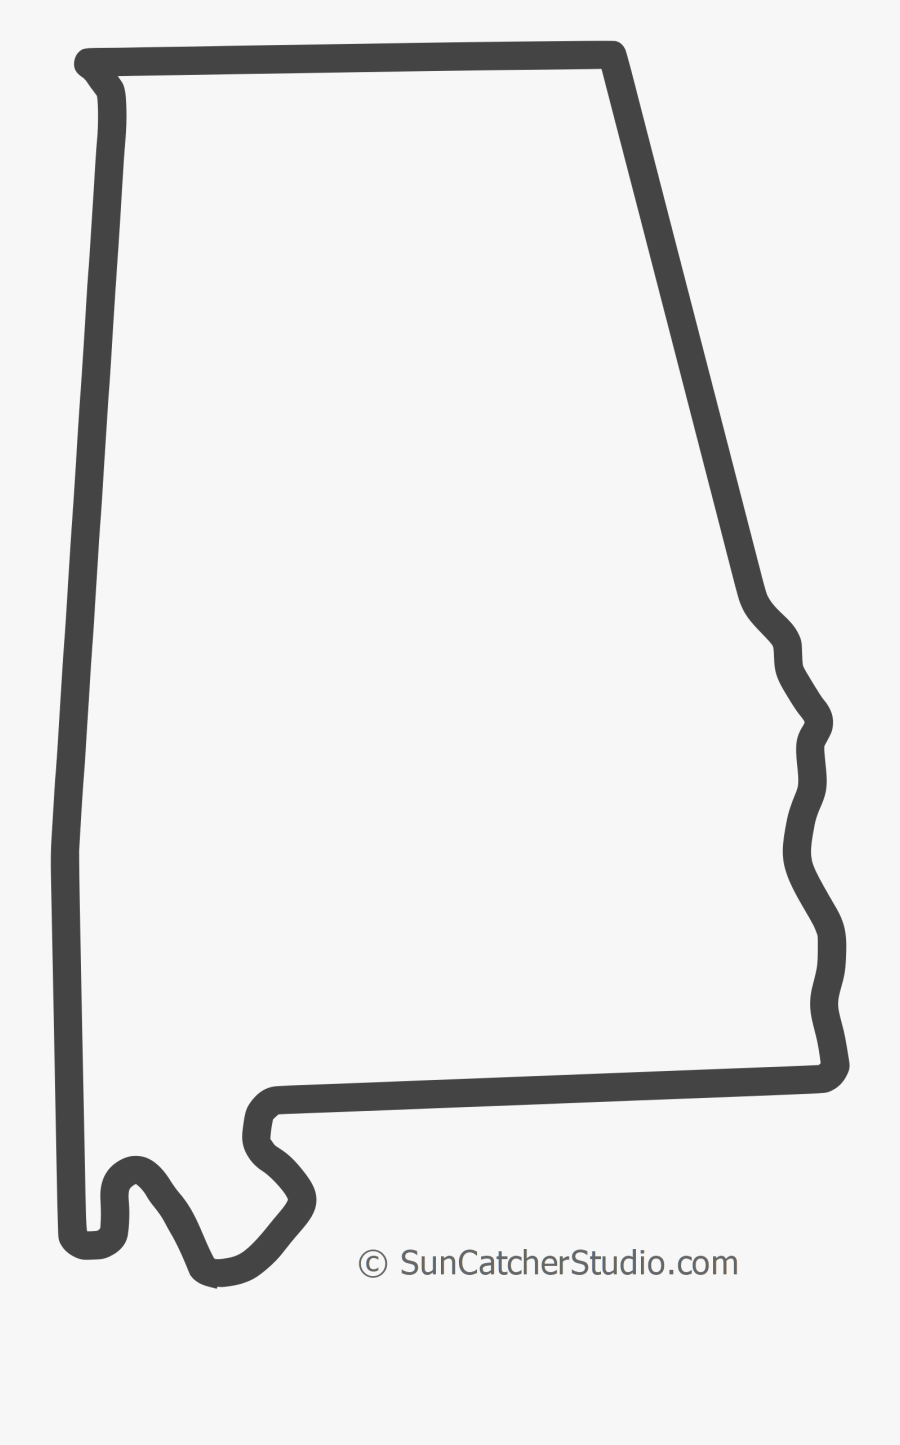 Download Free Alabama Outline With Home On Border, Cricut Or ...